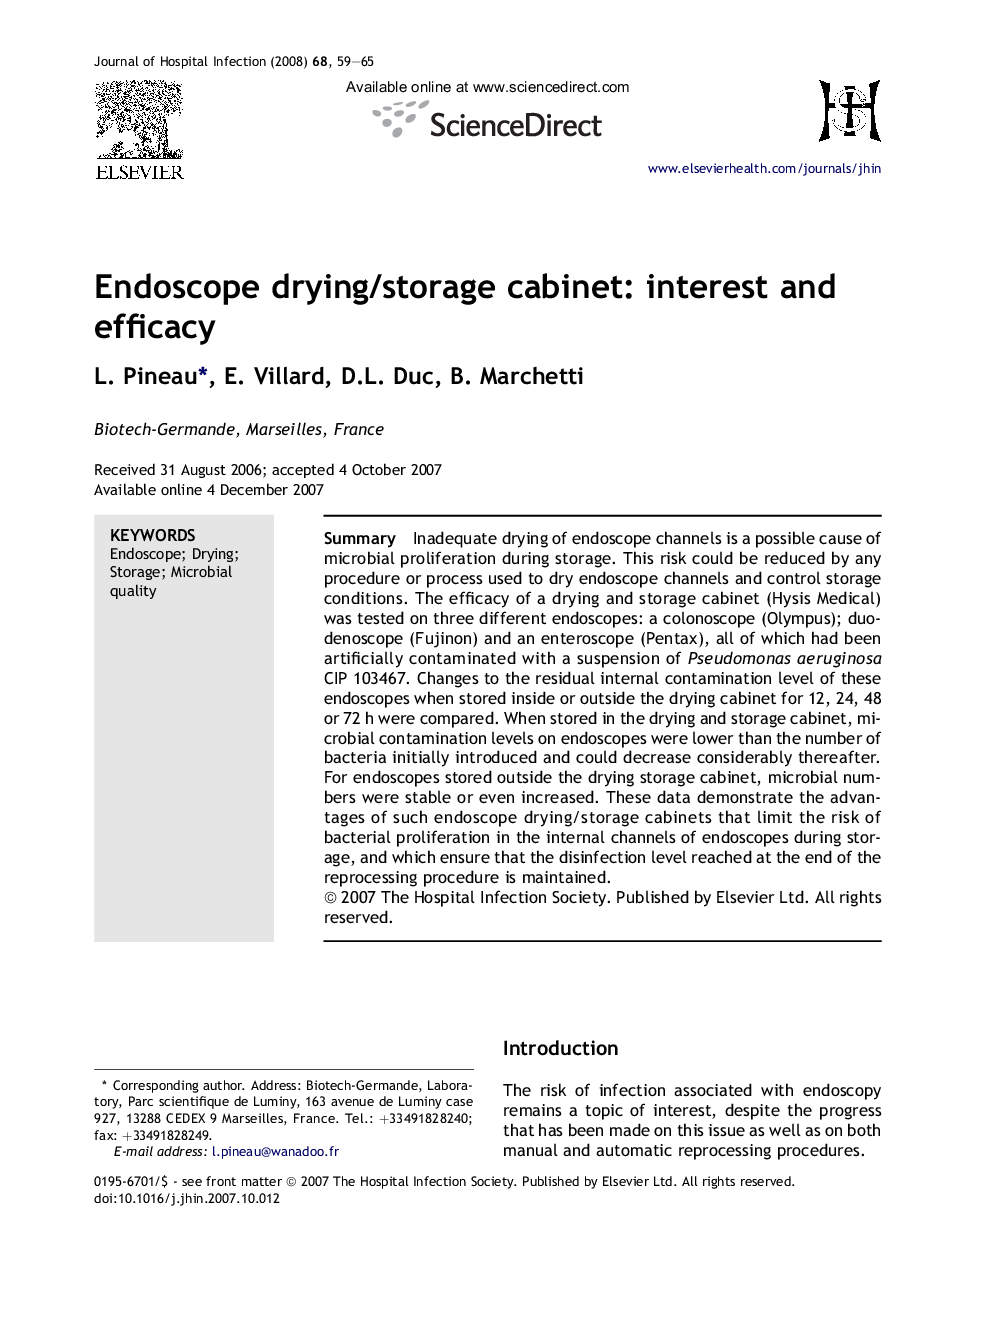 Endoscope drying/storage cabinet: interest and efficacy